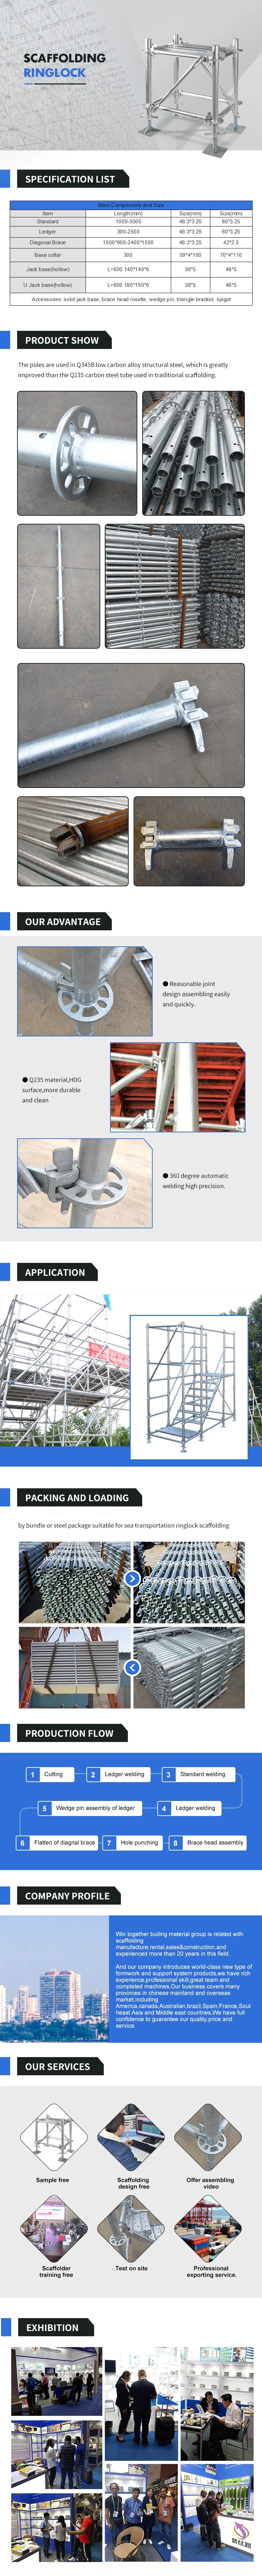 Ring Lock Scaffolding Material /Craigslist Used Scaffolding for Sale